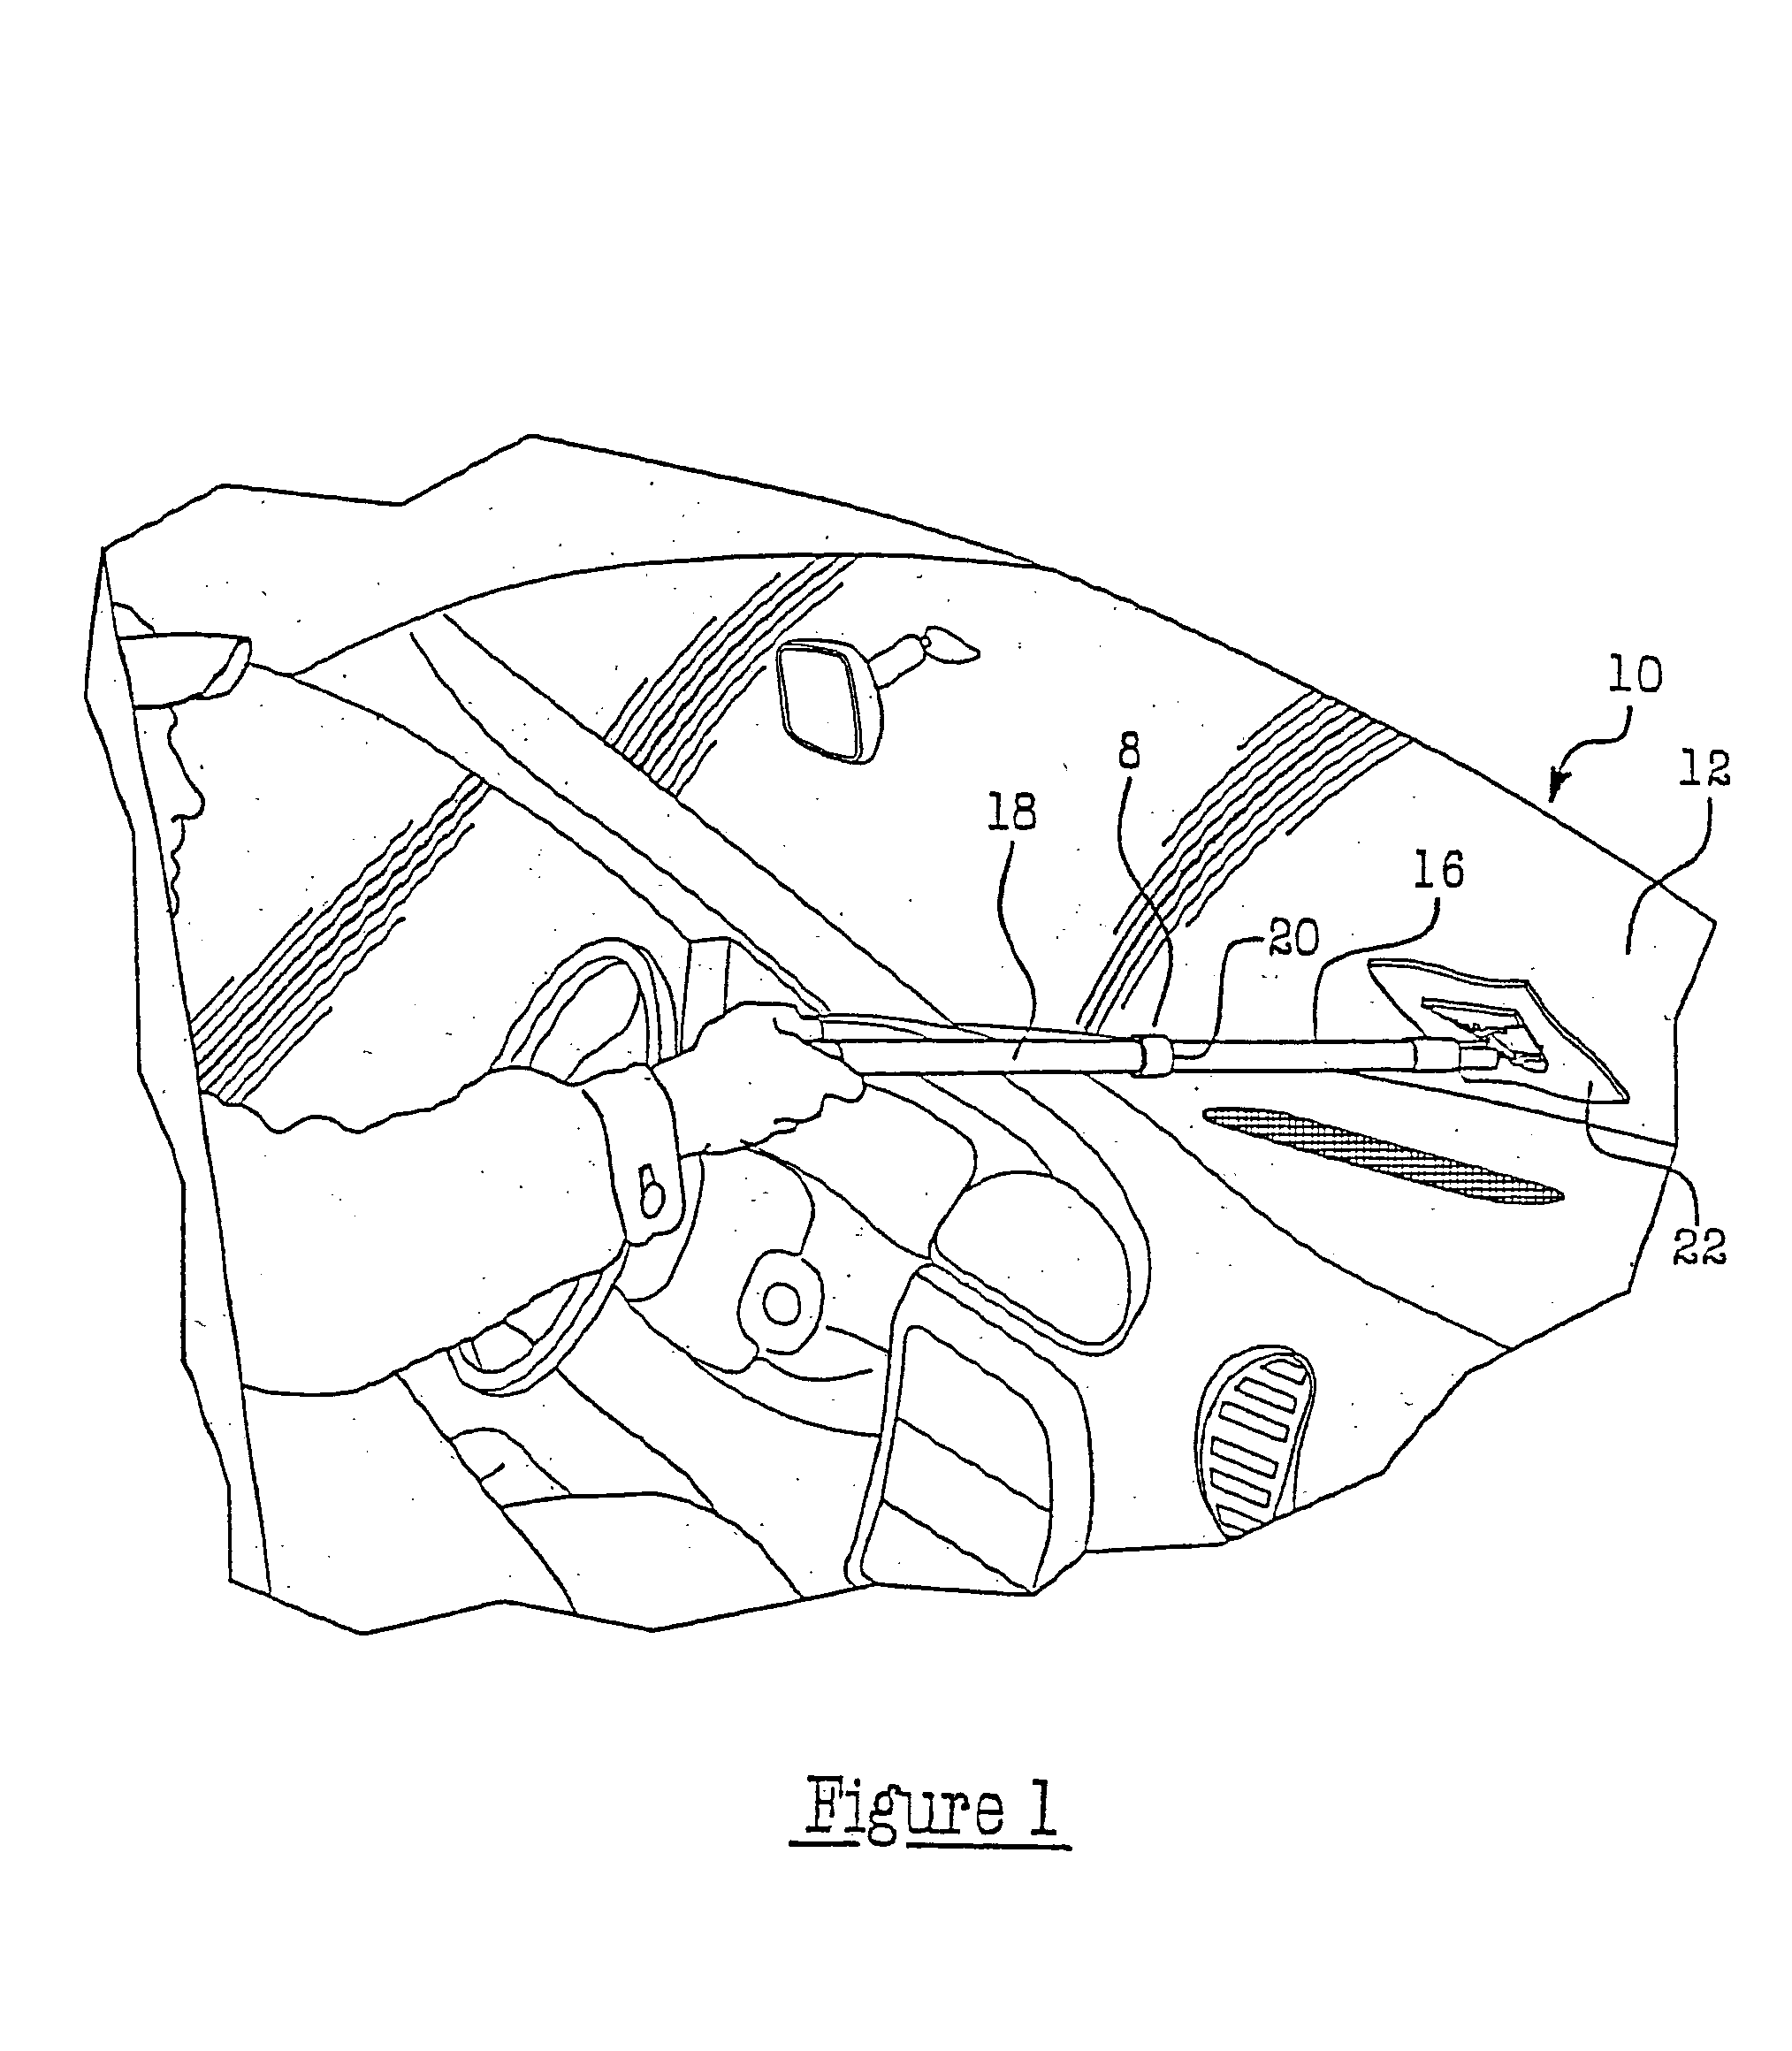 Apparatus for cleaning or otherwise engaging glass or another surface and method for using the same